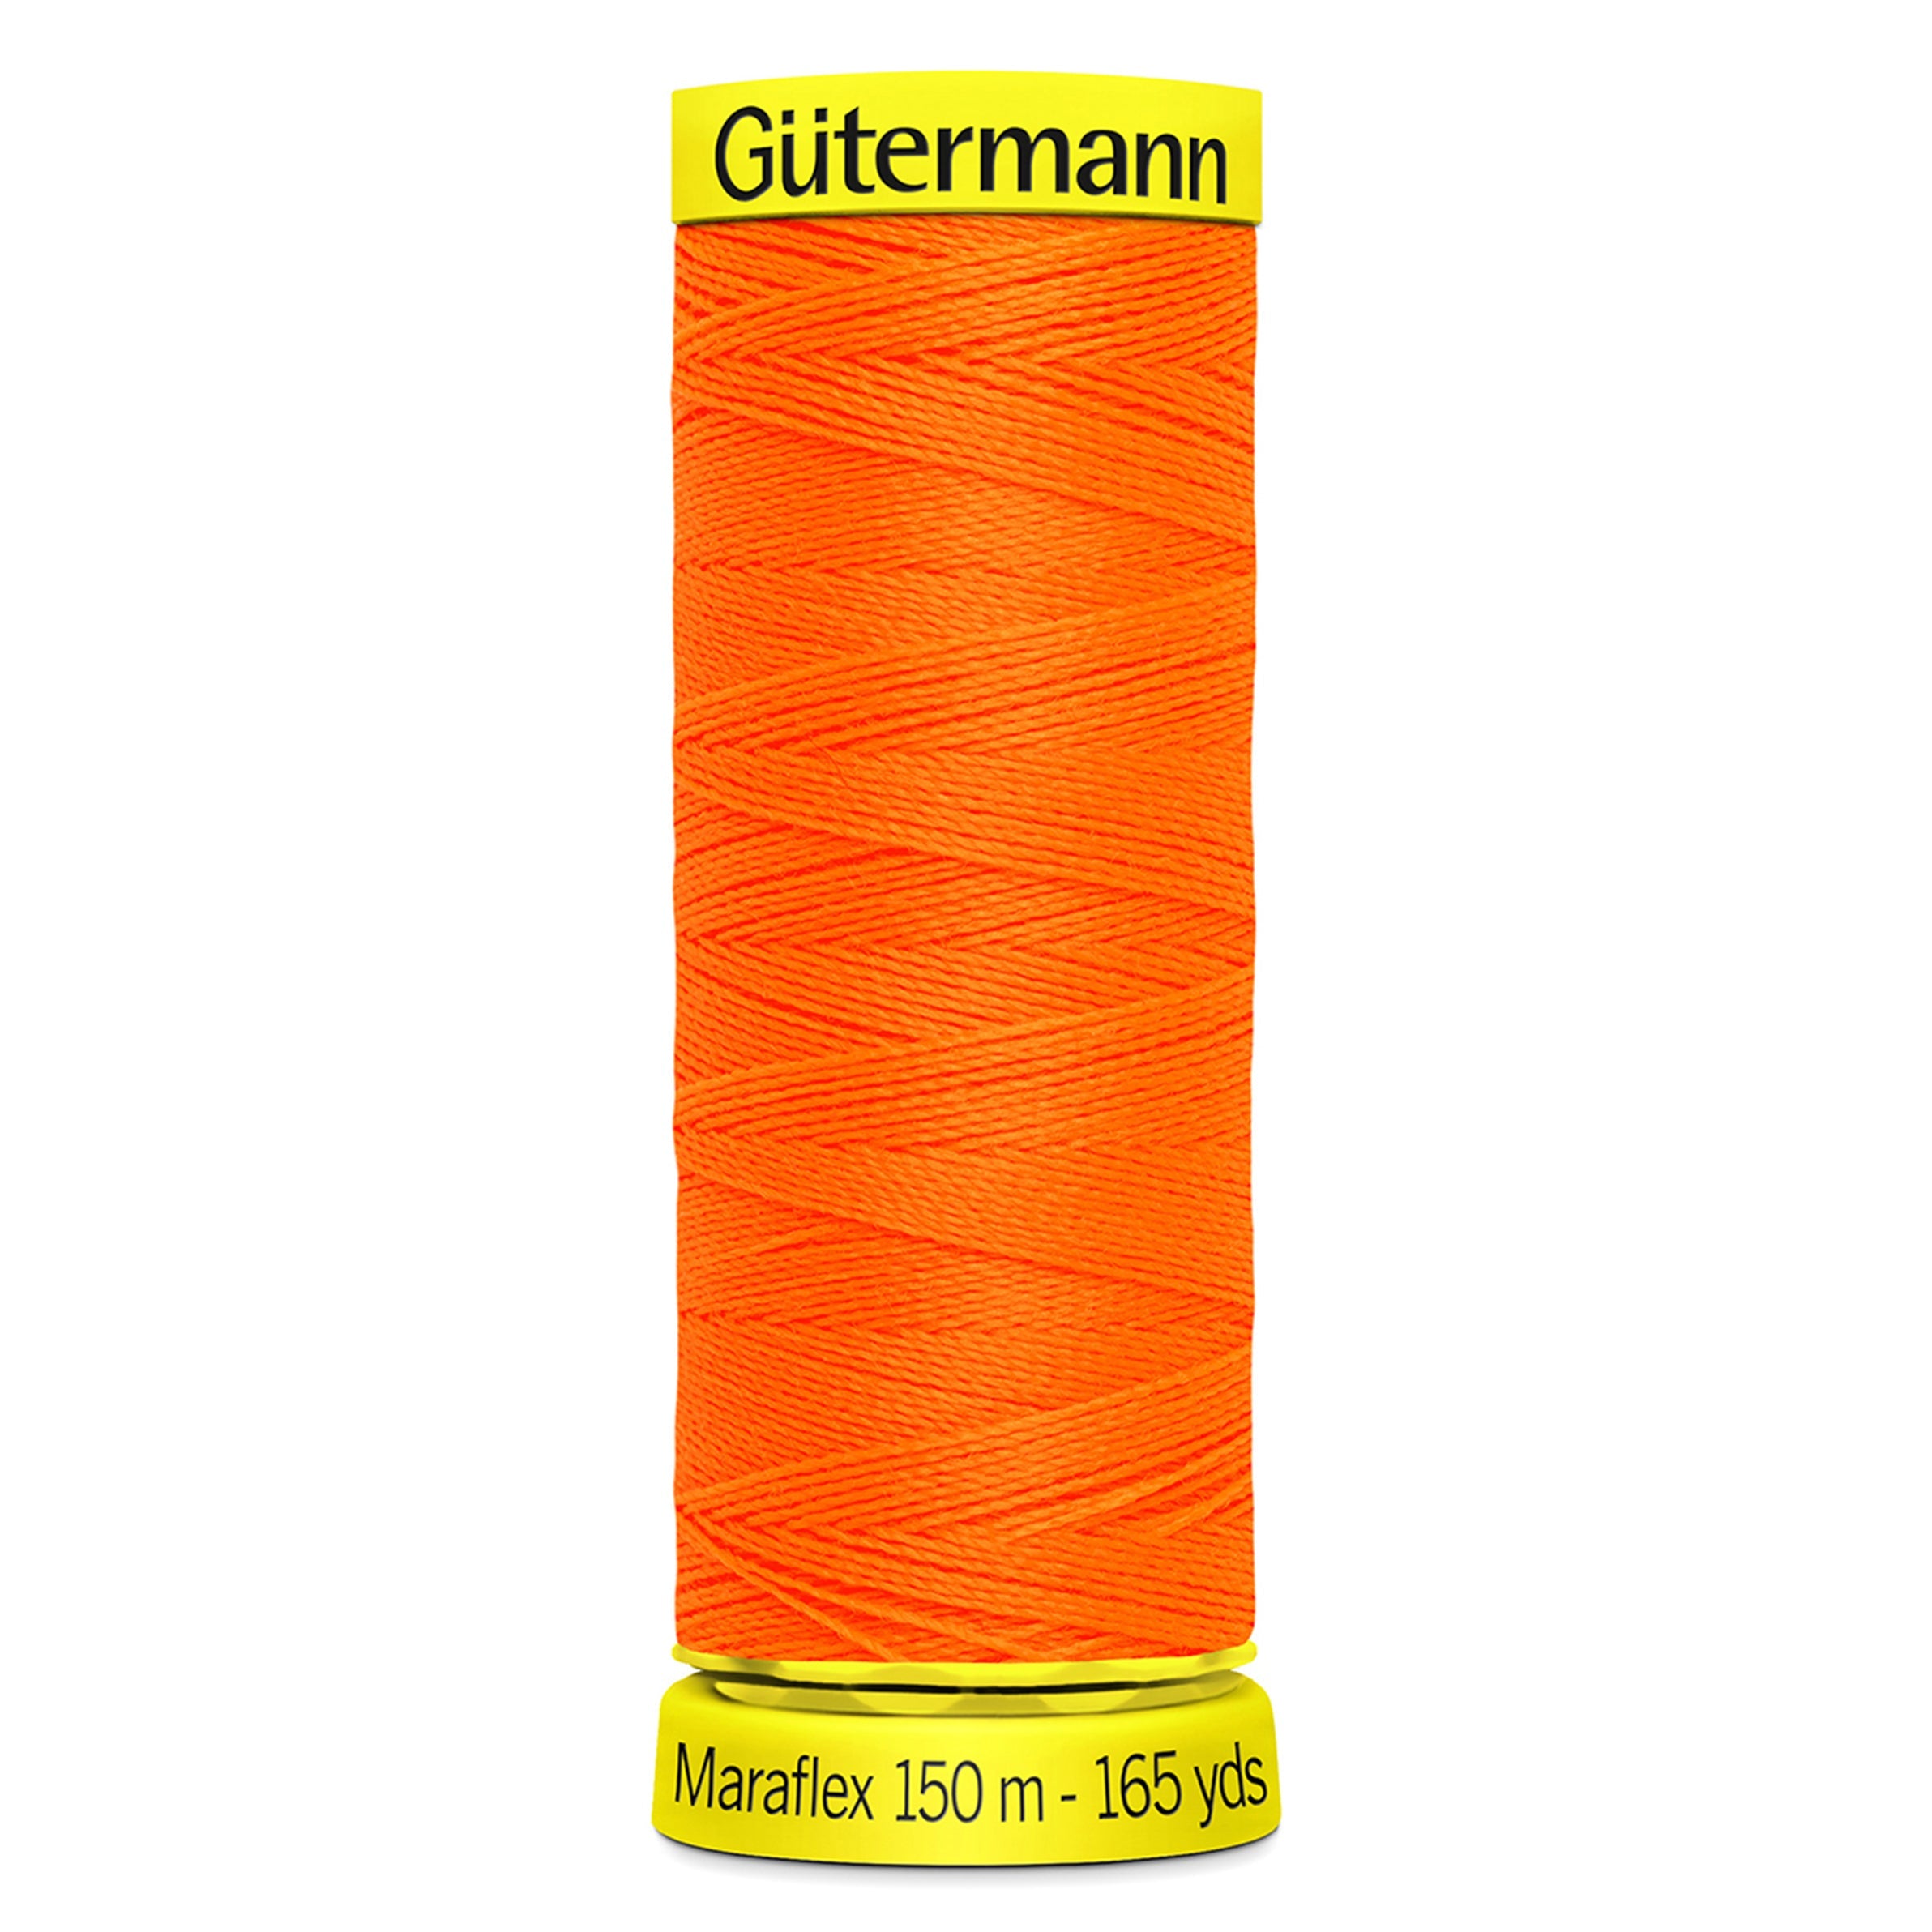 Gutermann Maraflex Stretchy Sewing Thread 150m colour 3871 Neon Orange from Jaycotts Sewing Supplies